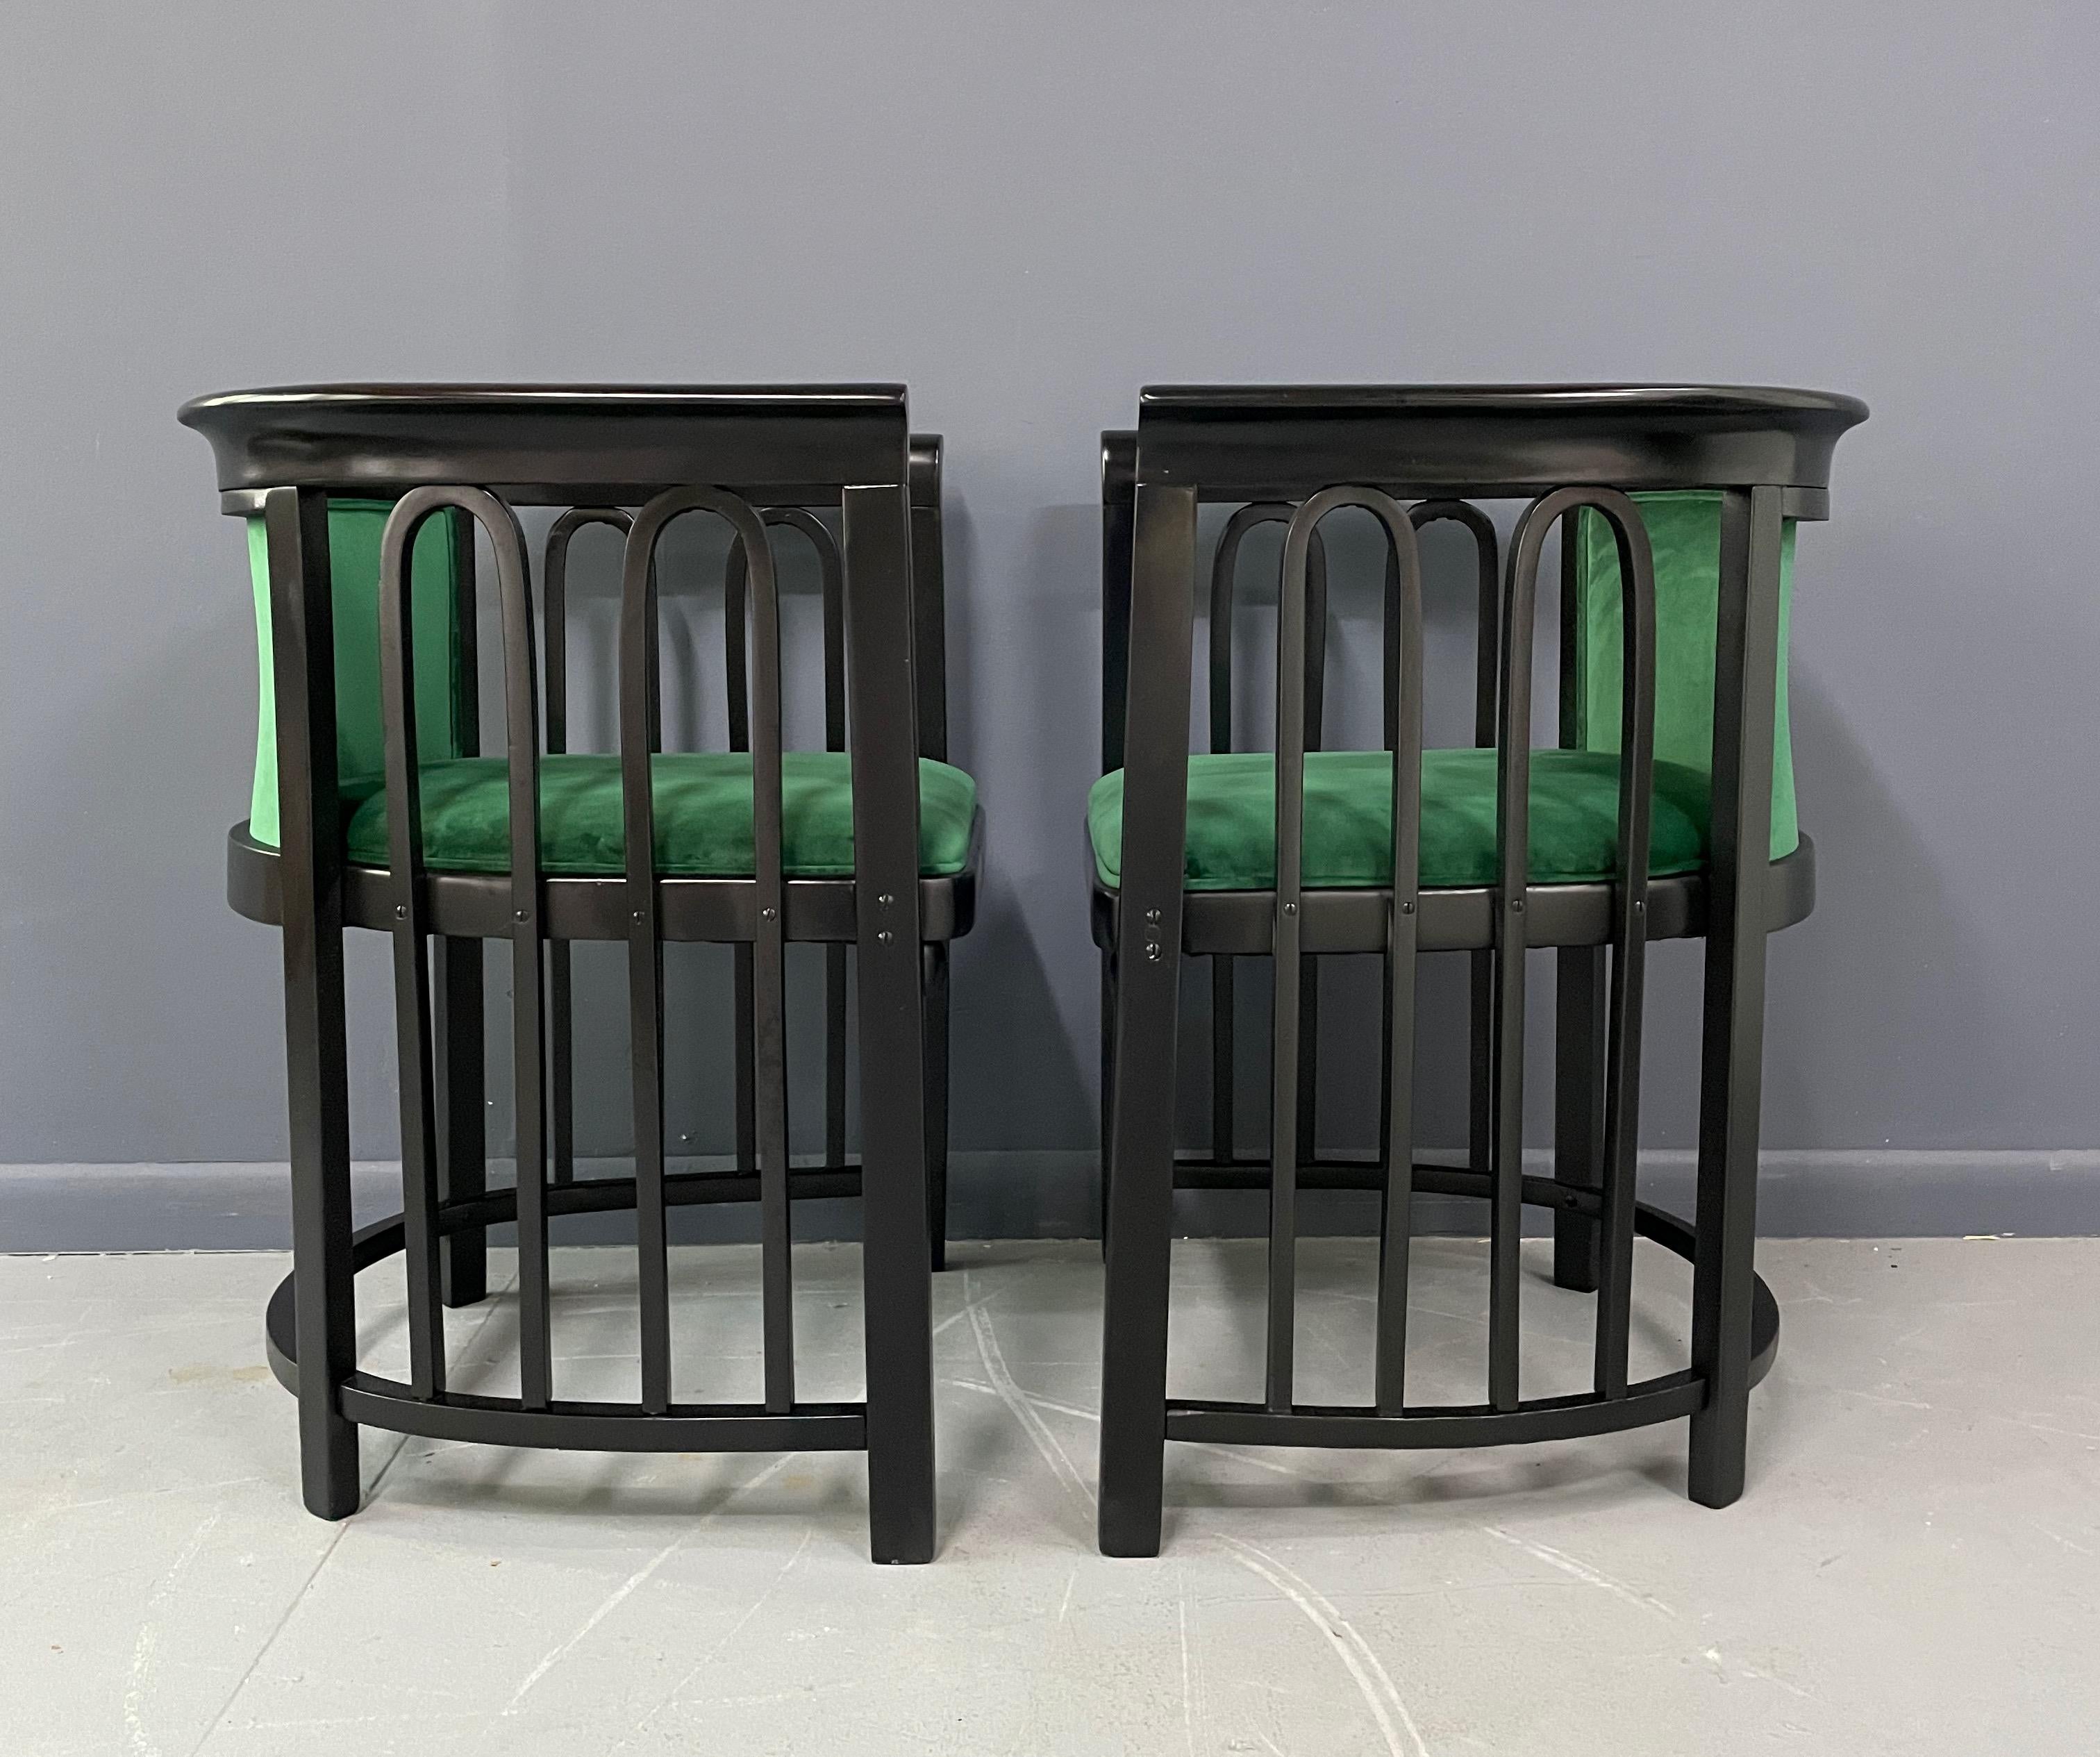 Vienna Secession Josef Hoffman Pair of Secessionist Bentwood Barrel Back Arm Chairs for J&J Kohn